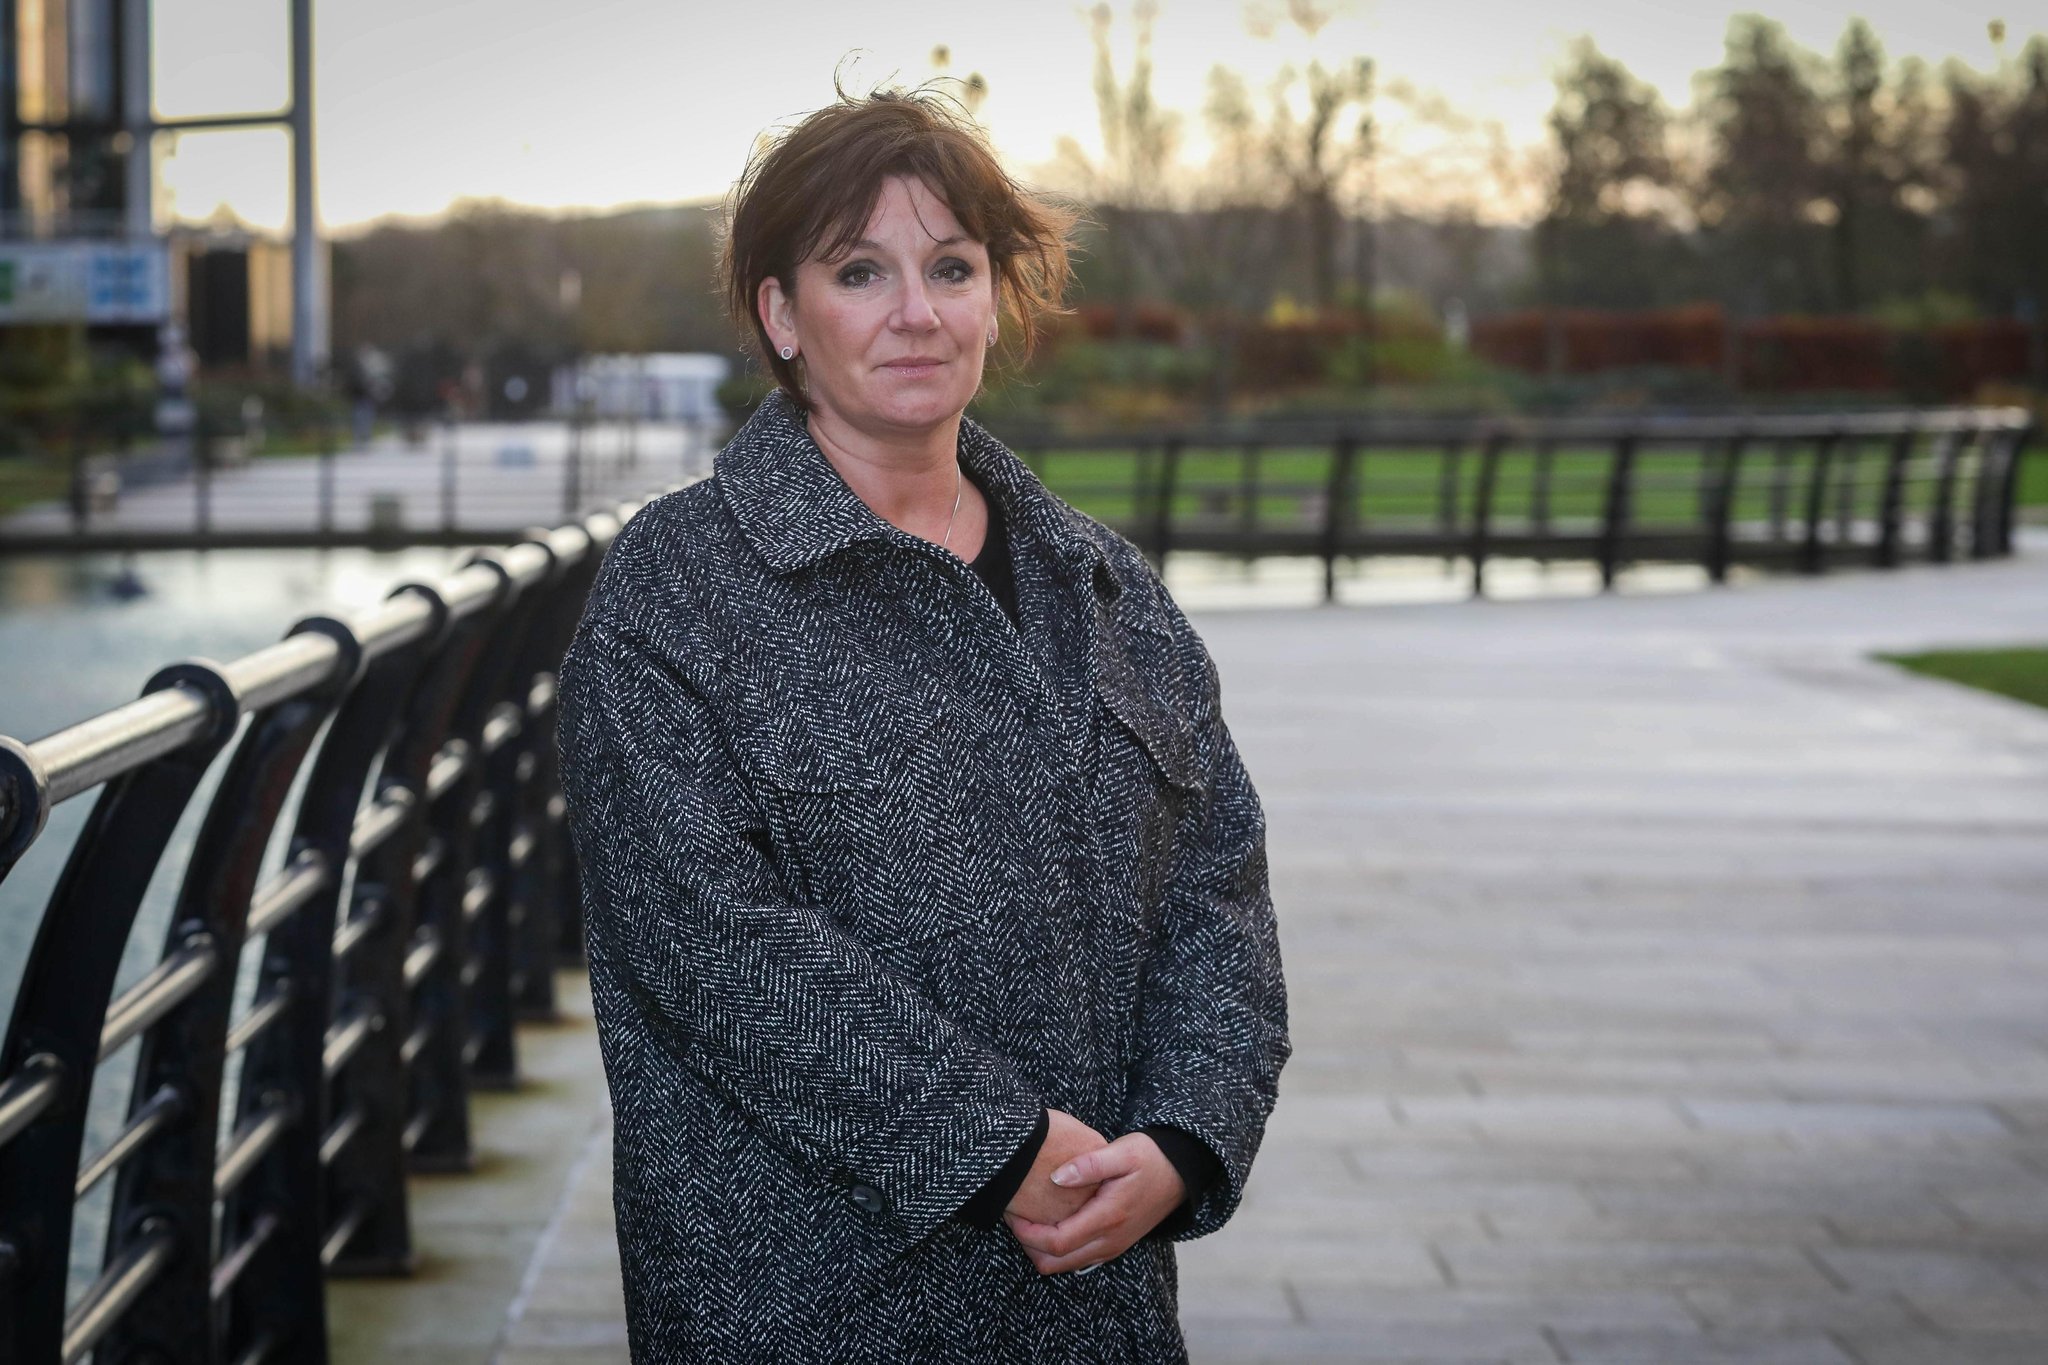 'Serious questions' over payout of £560K to army admin worker over remarks about her religion in contrast to treatment of bereaved and wounded